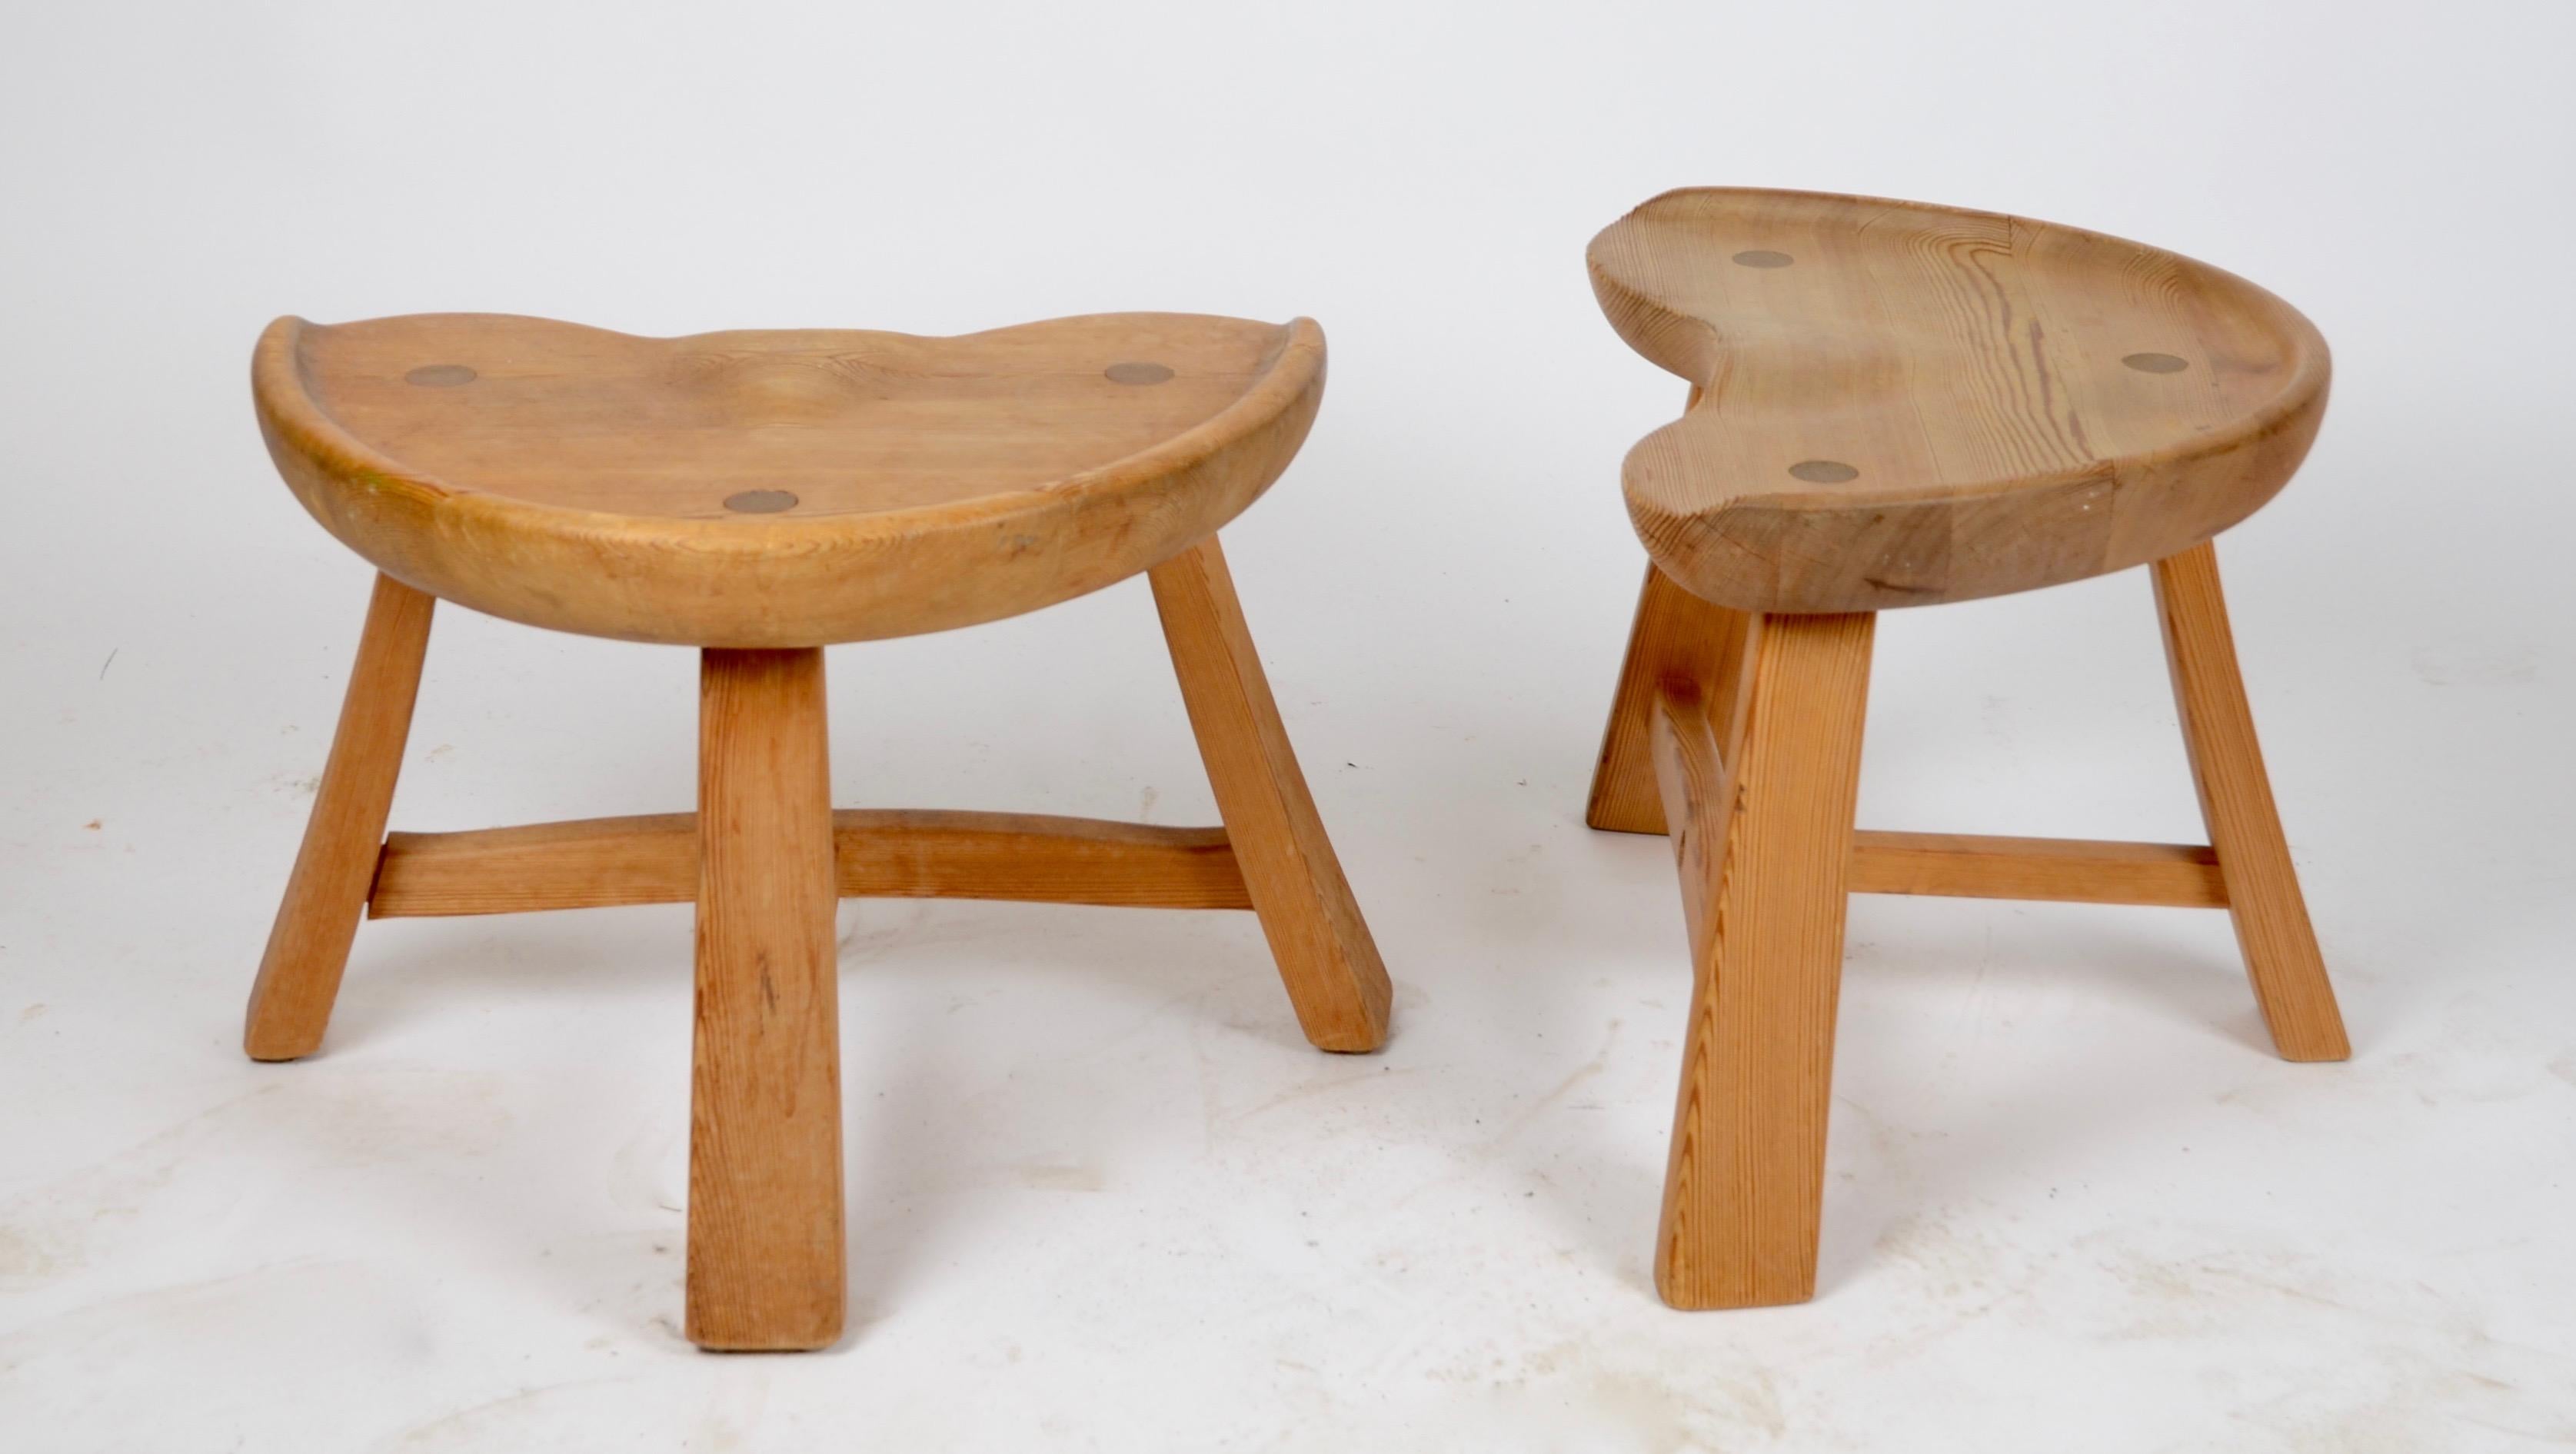 A pair of stools in pine, made by Krogenäs Möbler, Norway 1960s-1970s.